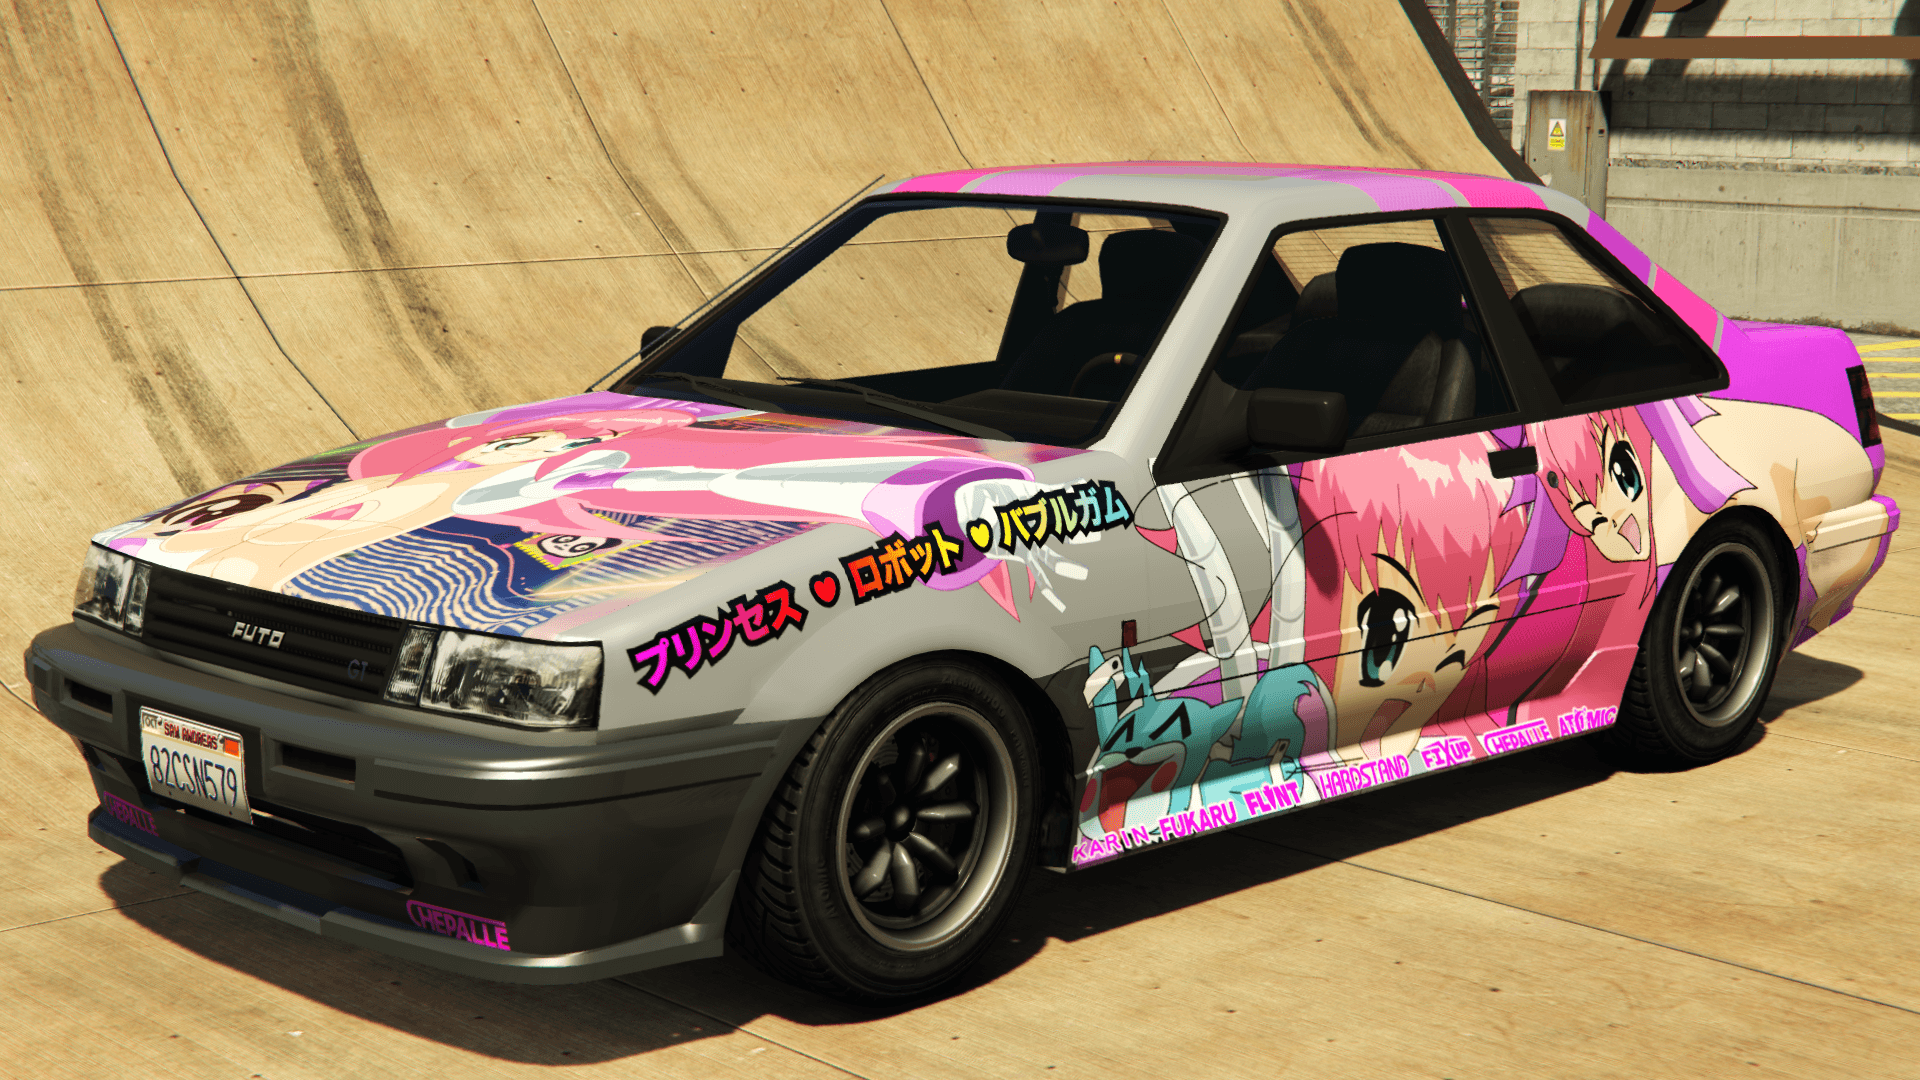 All Anime Cars In Gta 5 / Explore all cars, motorcycles, helicopters